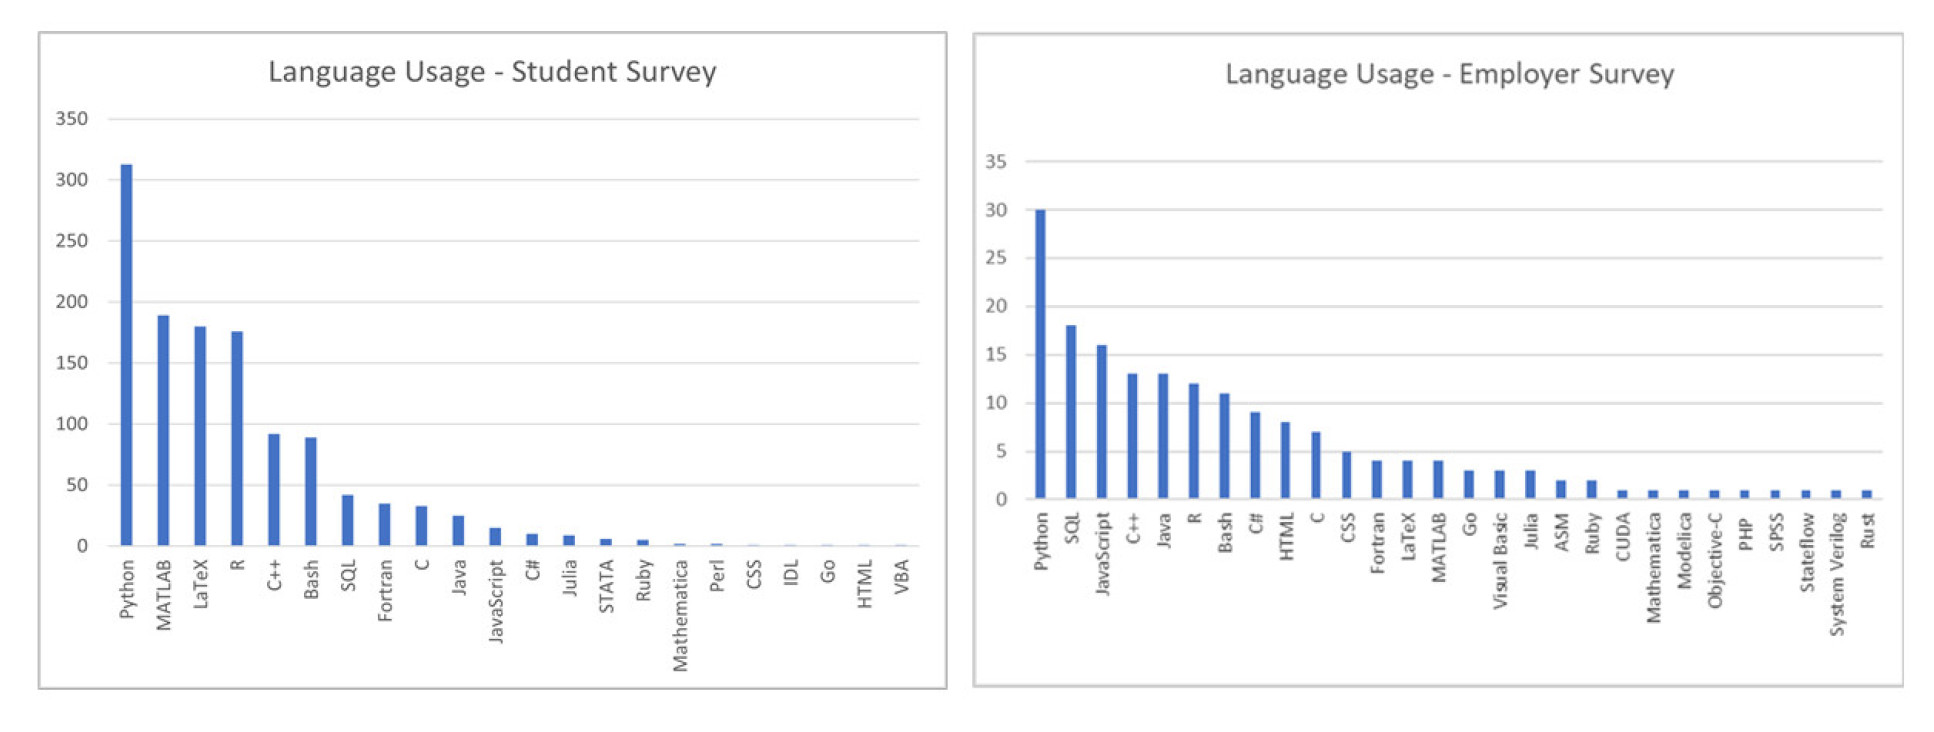 Results of the language usage survey - employer & student